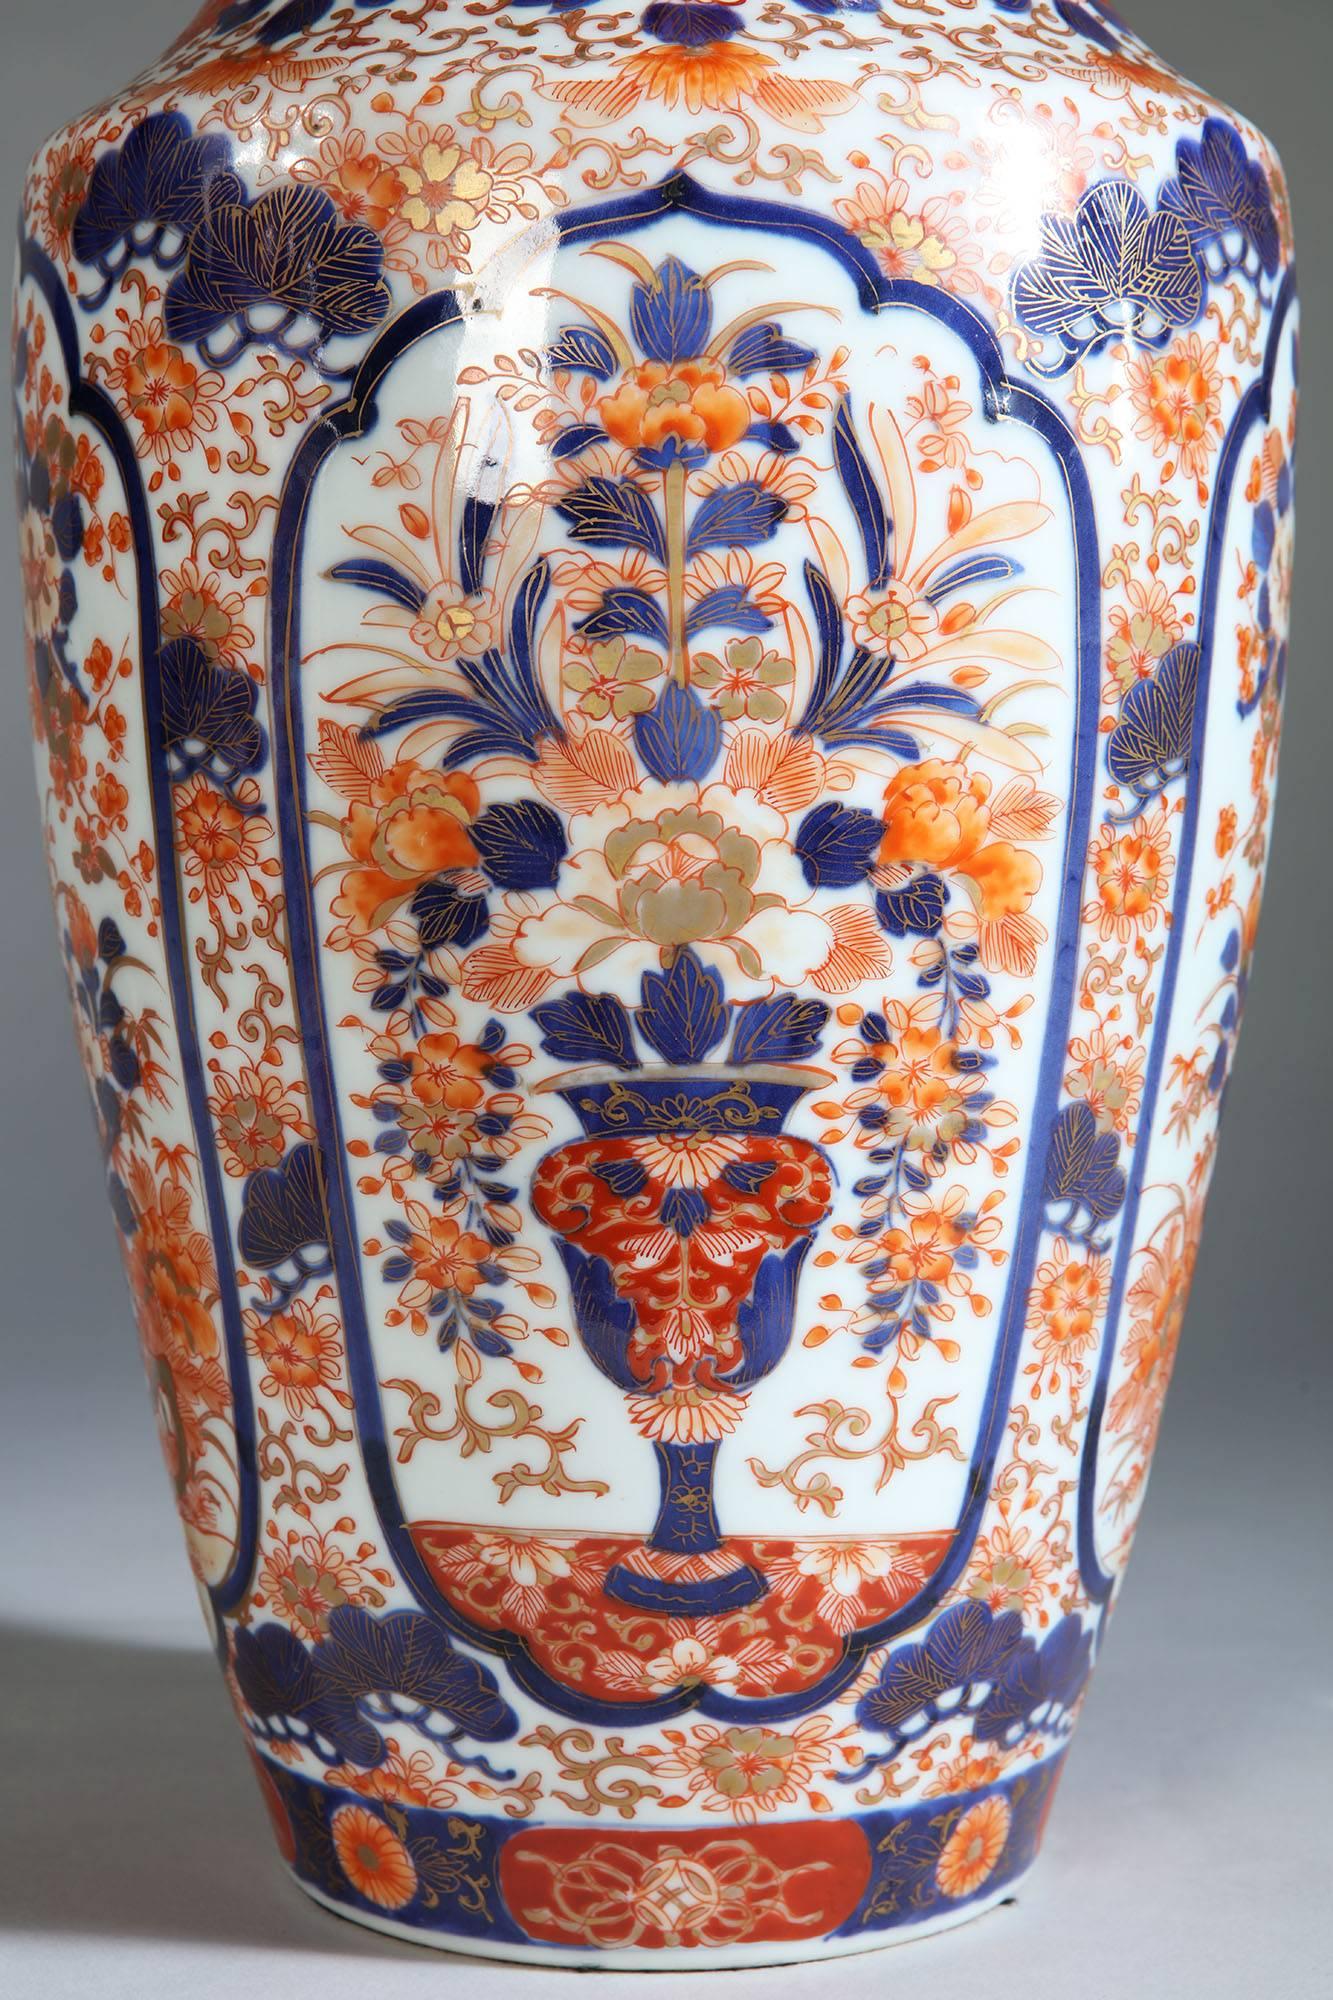 A pair of mid-19th century Imari vases, showing four cartouches filled with floral displays and exotic trees, now converted as lamps.